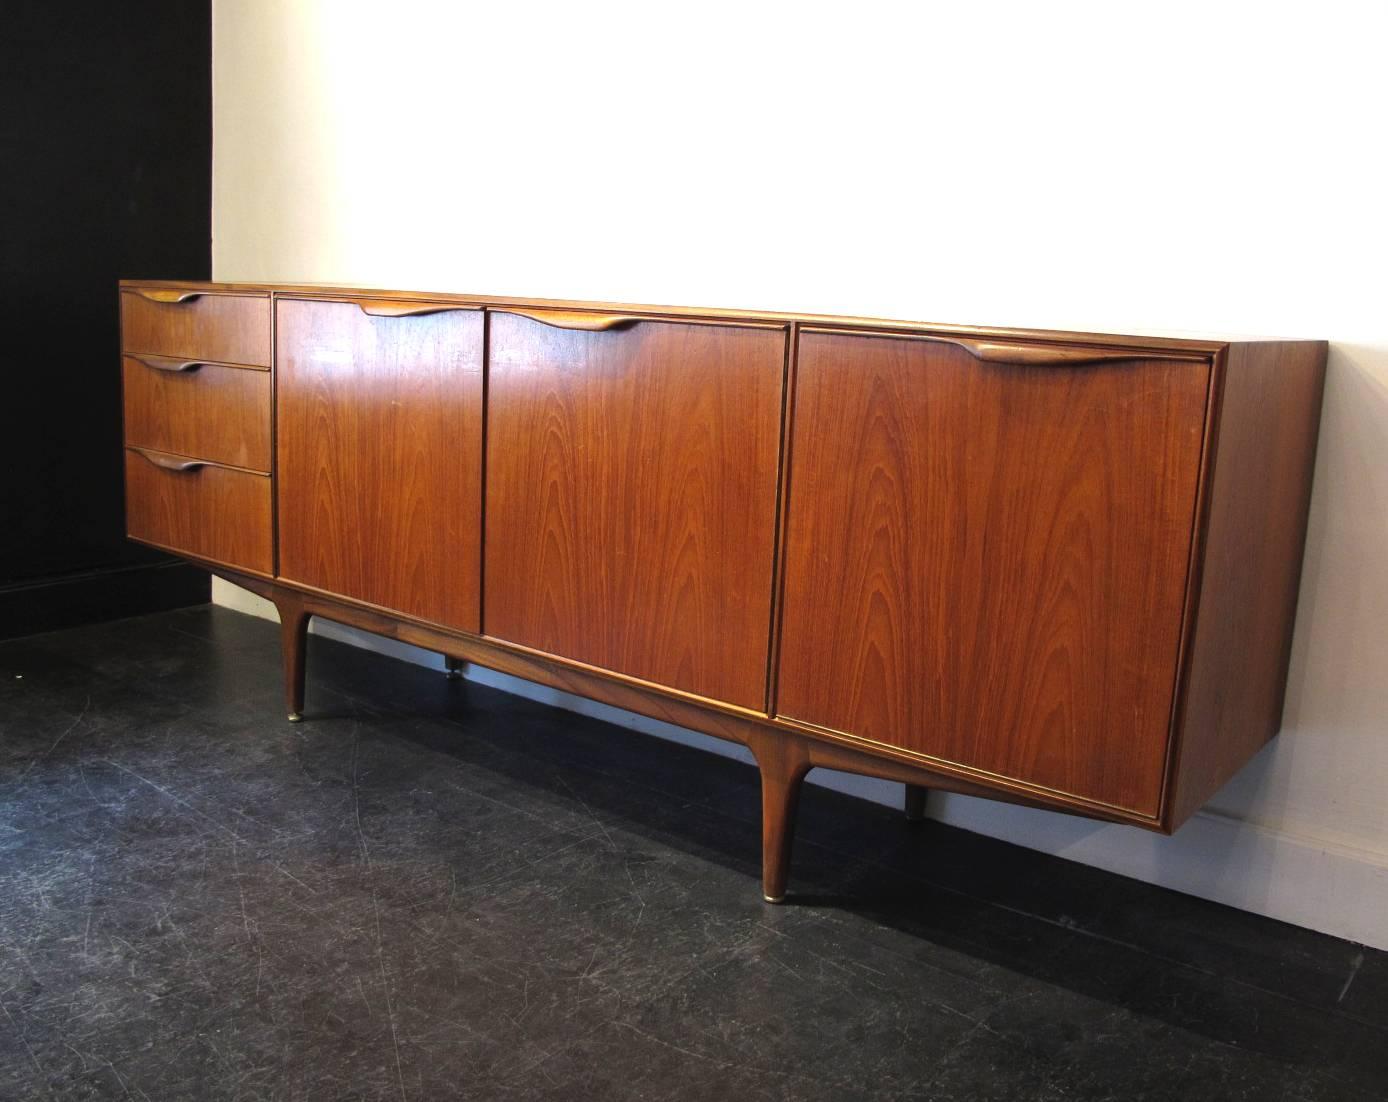 1960s teak sideboard and dry bar was manufactured in Scotland by A. H. McIntosh, the first company to bring Scandinavian Modern to the United Kingdom.